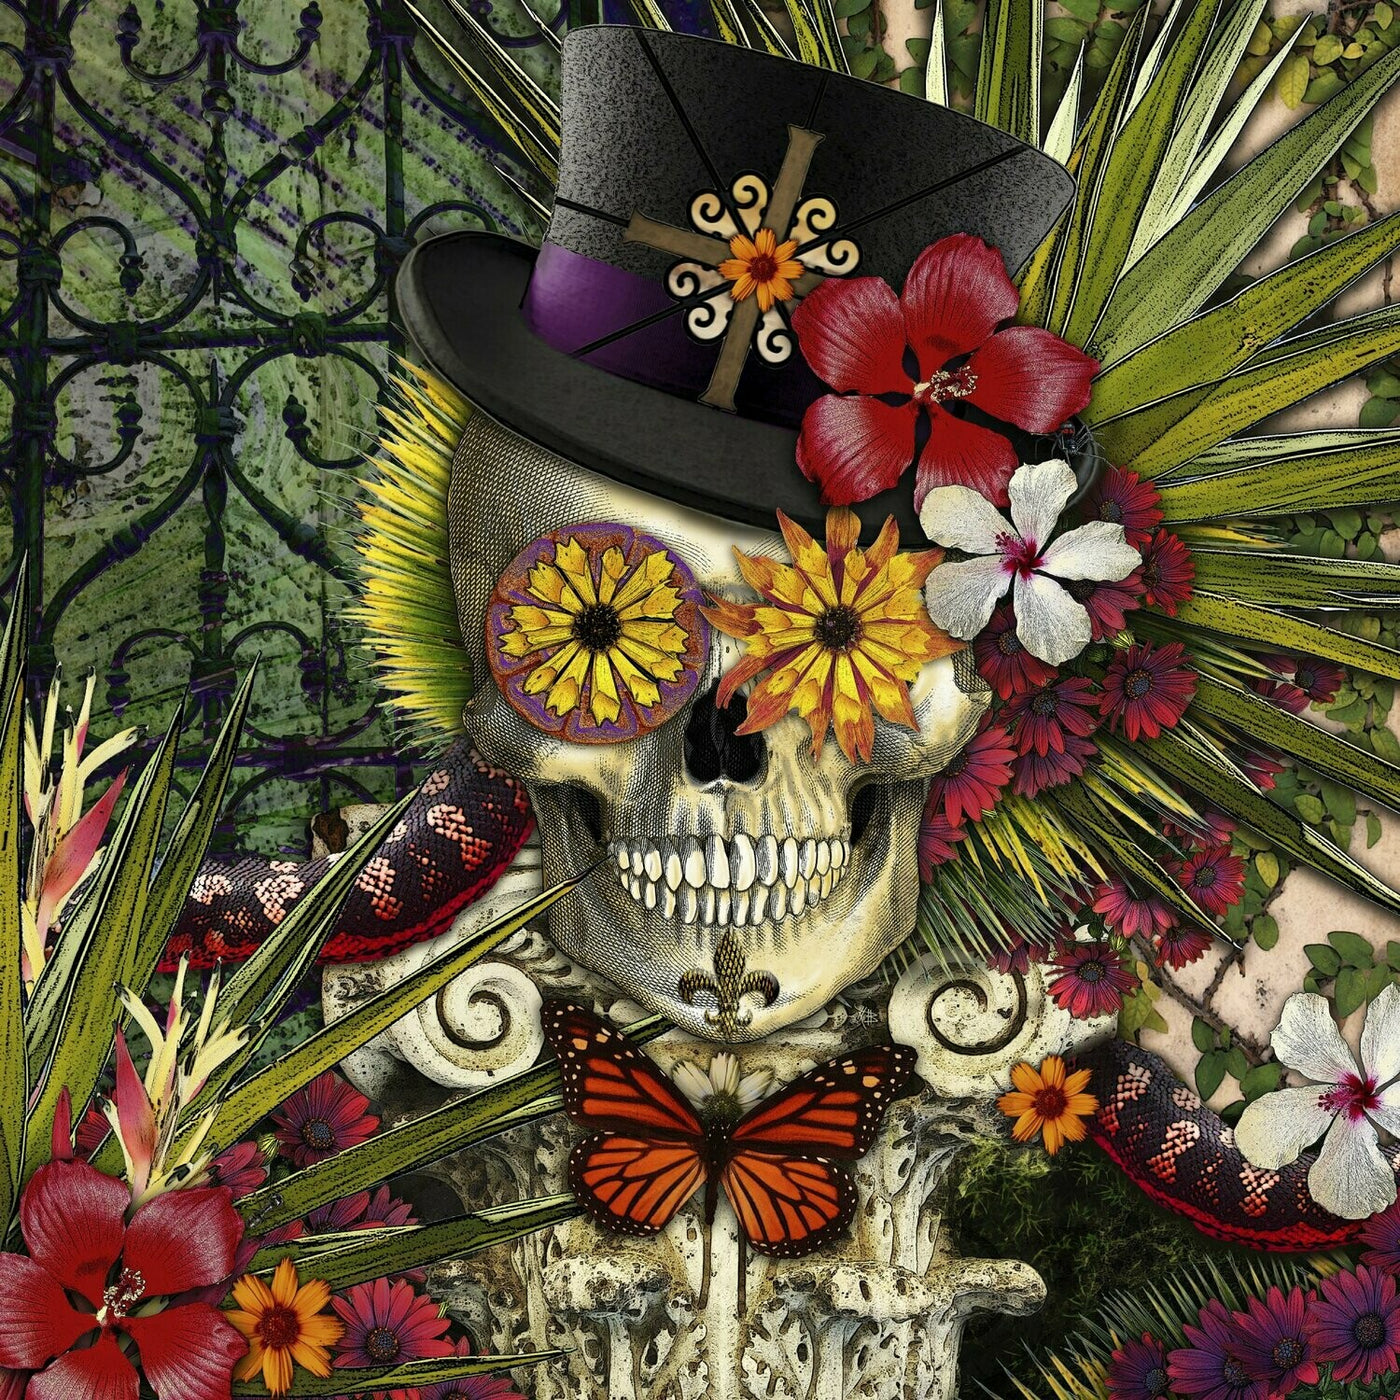 "Baron of Bloom" (Skull Art) Premium Wooden Jigsaw Puzzle with Ash Wood Storage Box—Large - Texas Time Gifts and Fine Art 